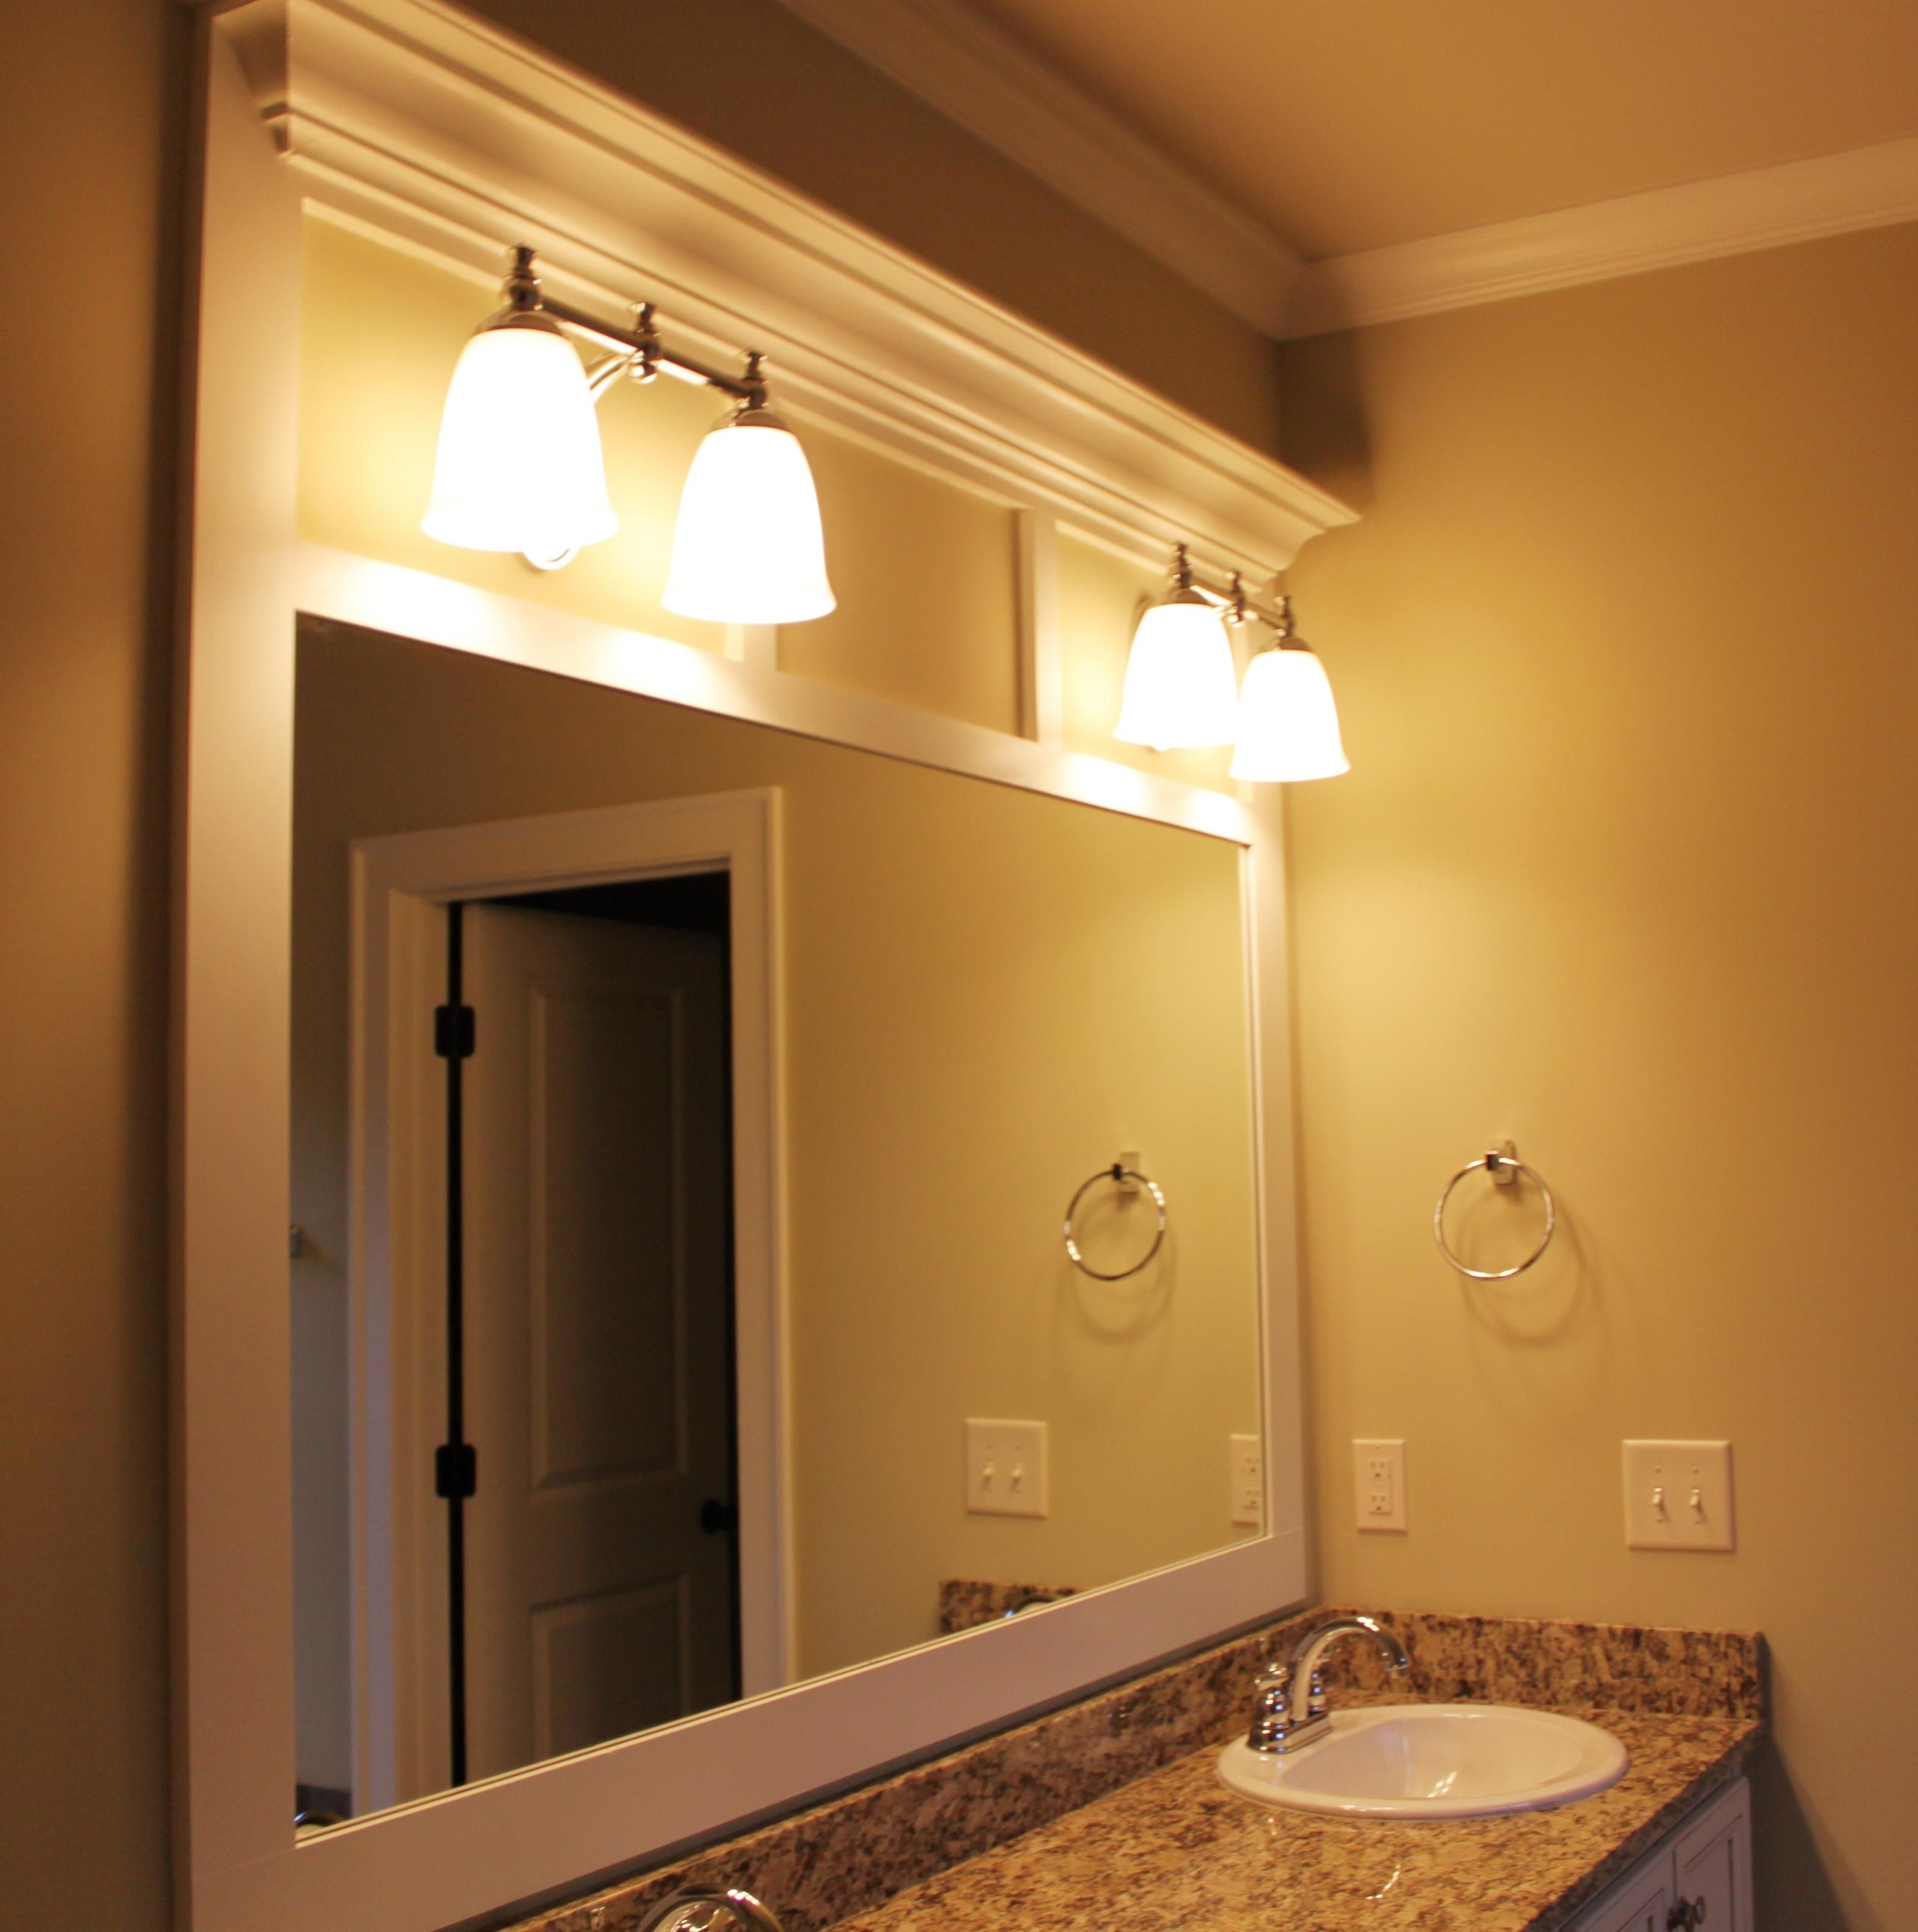 Custom Framed Mirrors For Bathrooms | Free Designs Interior Intended For Custom Bathroom Mirrors (View 8 of 20)